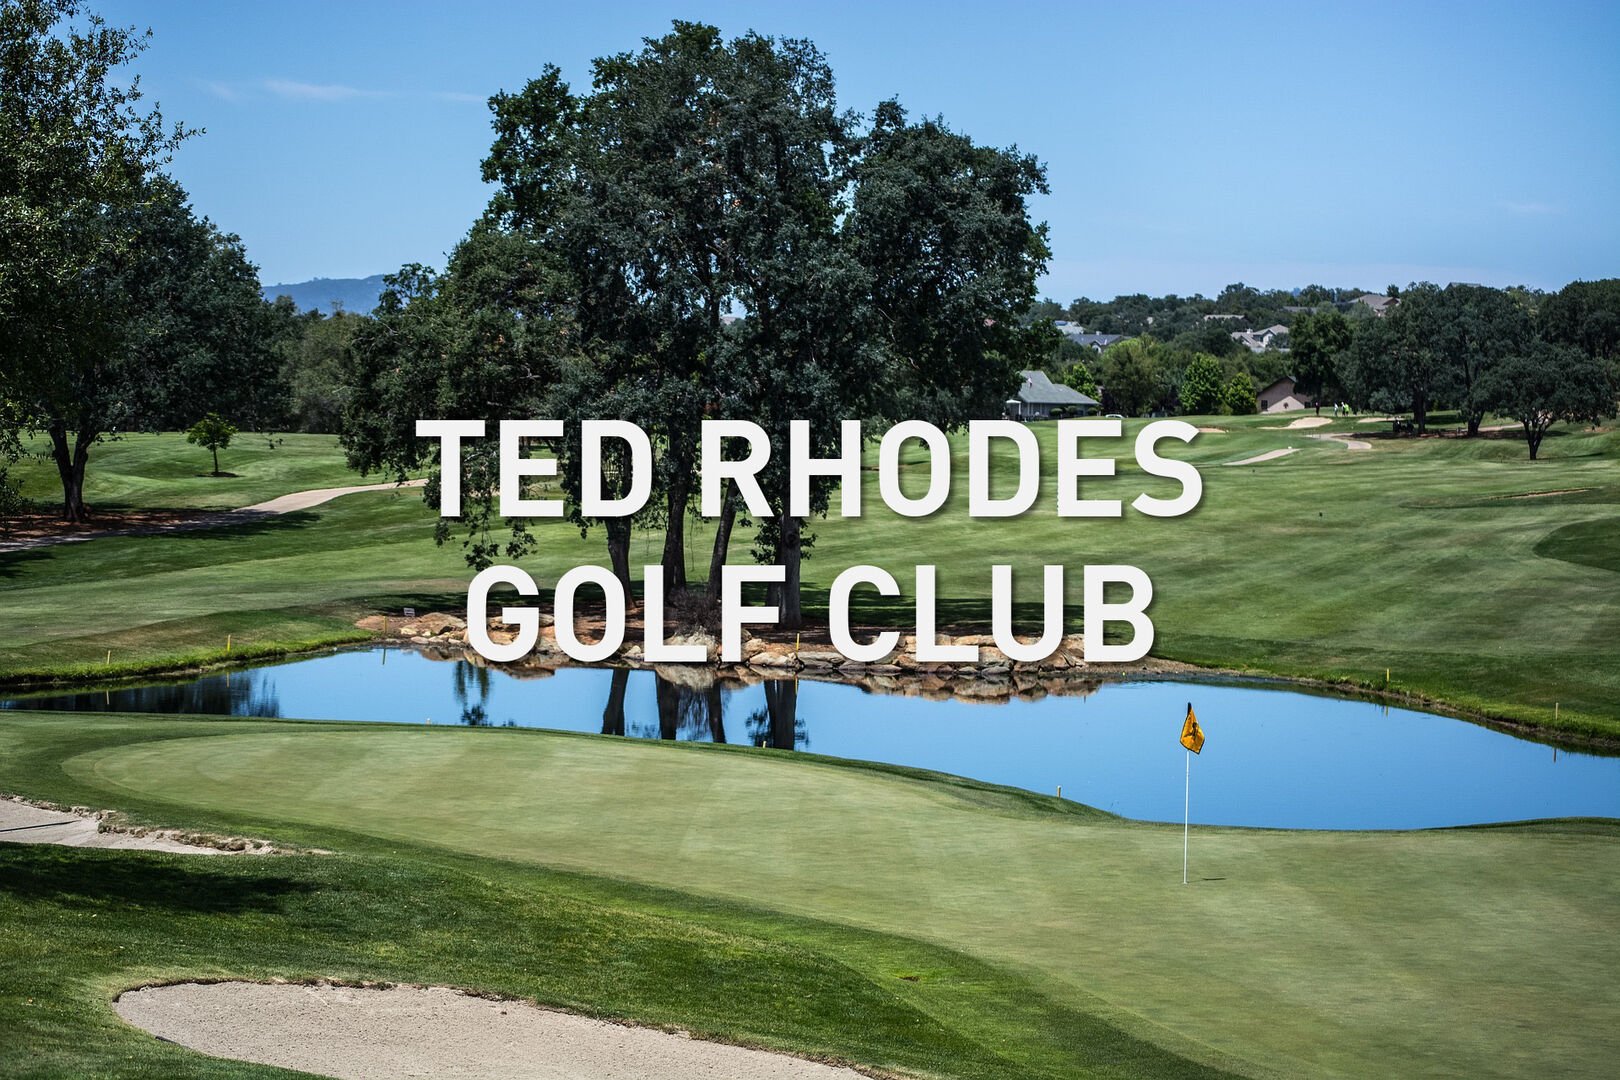 9 mins: Ted Rhodes Golf Course